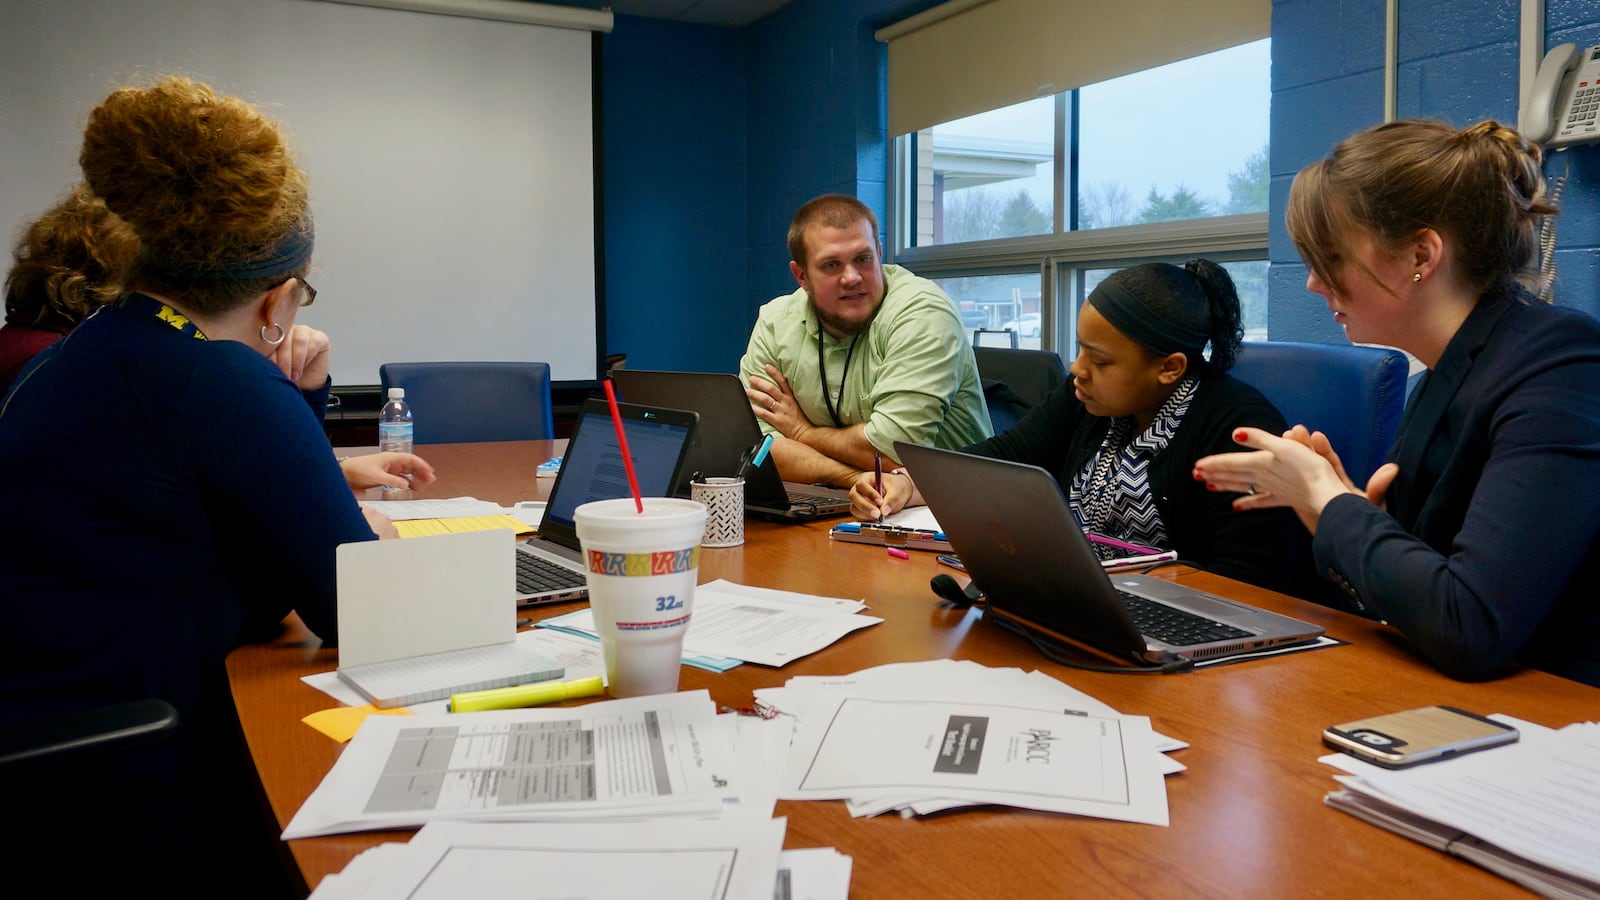 The multi-classroom leaders meet regularly with teachers and district coaches to review data and plan lessons.